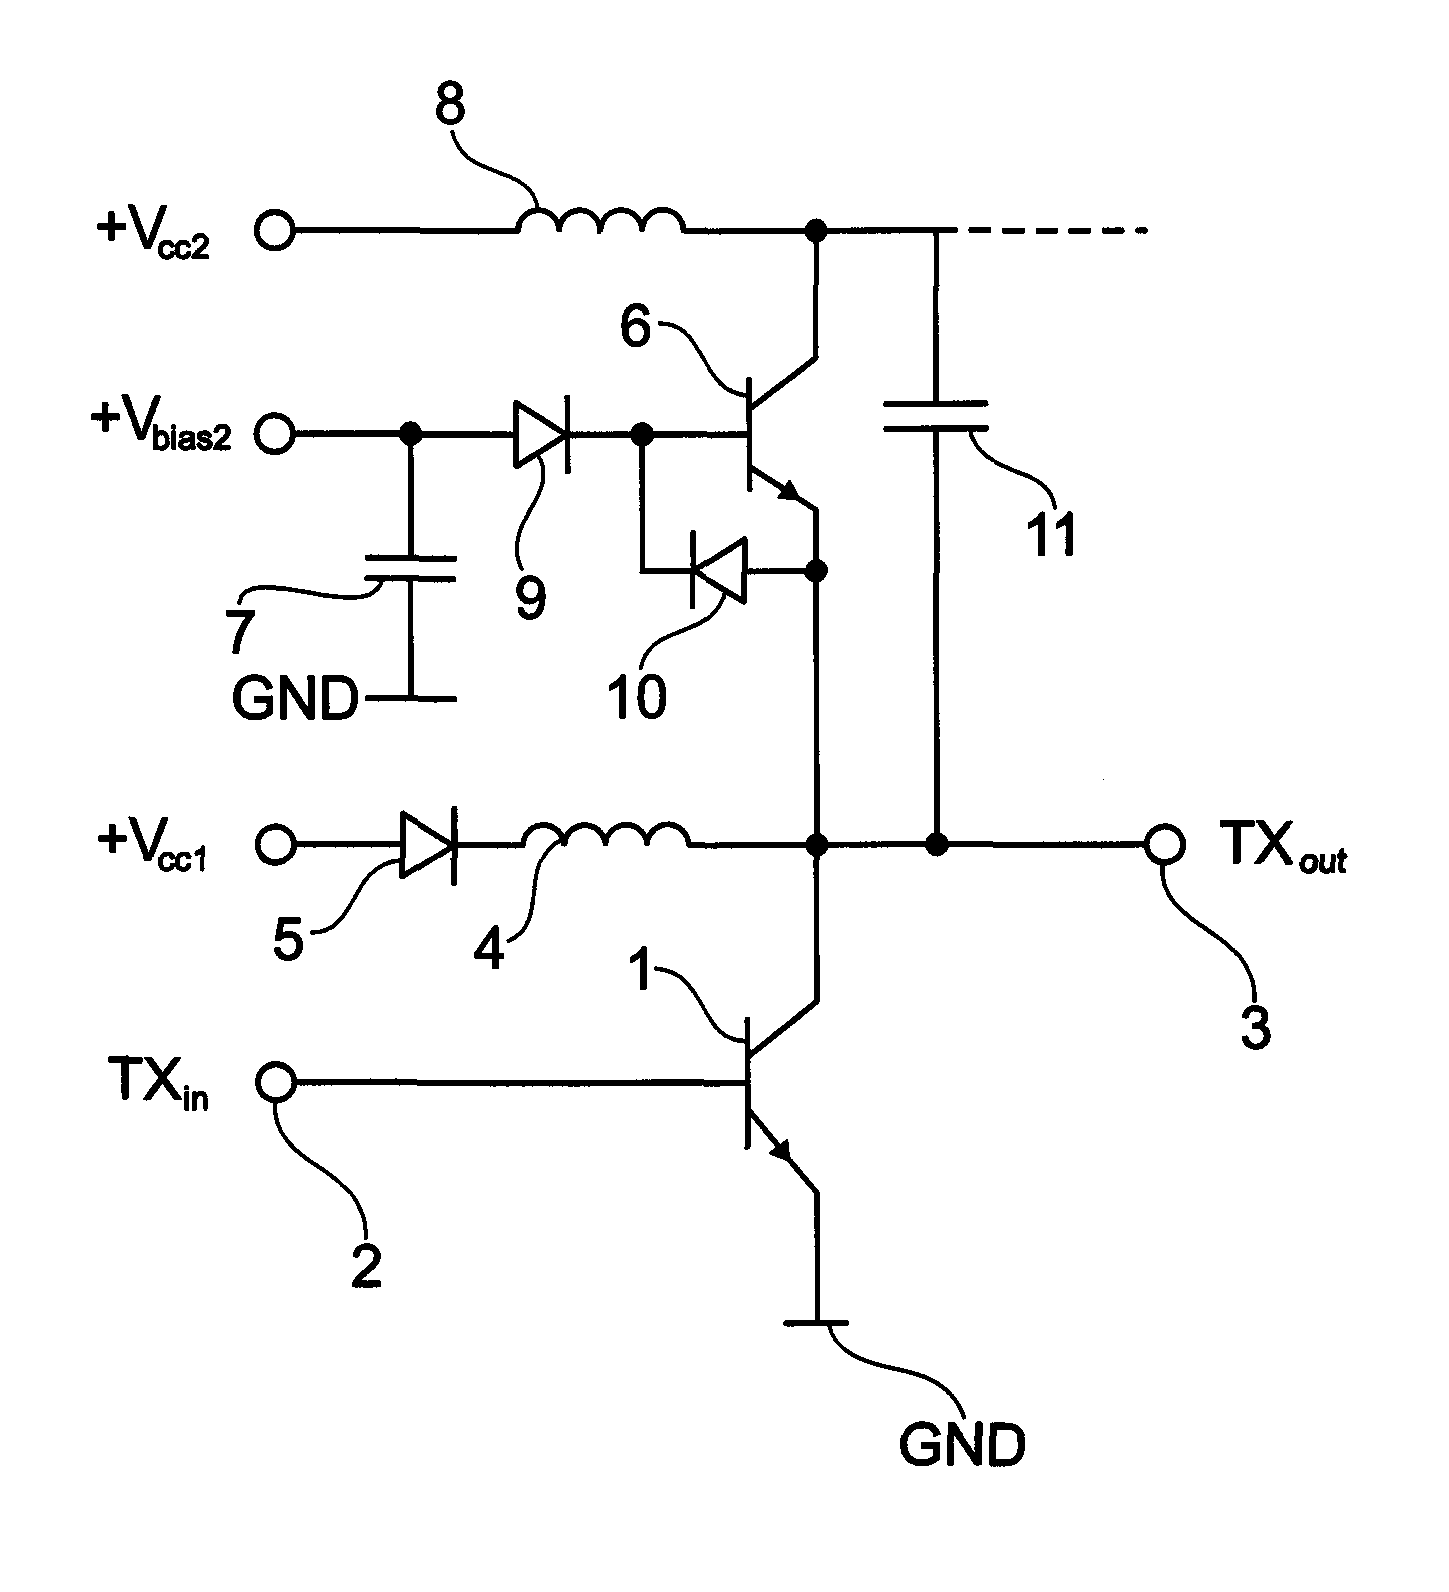 Power amplifier with dynamically added supply voltages